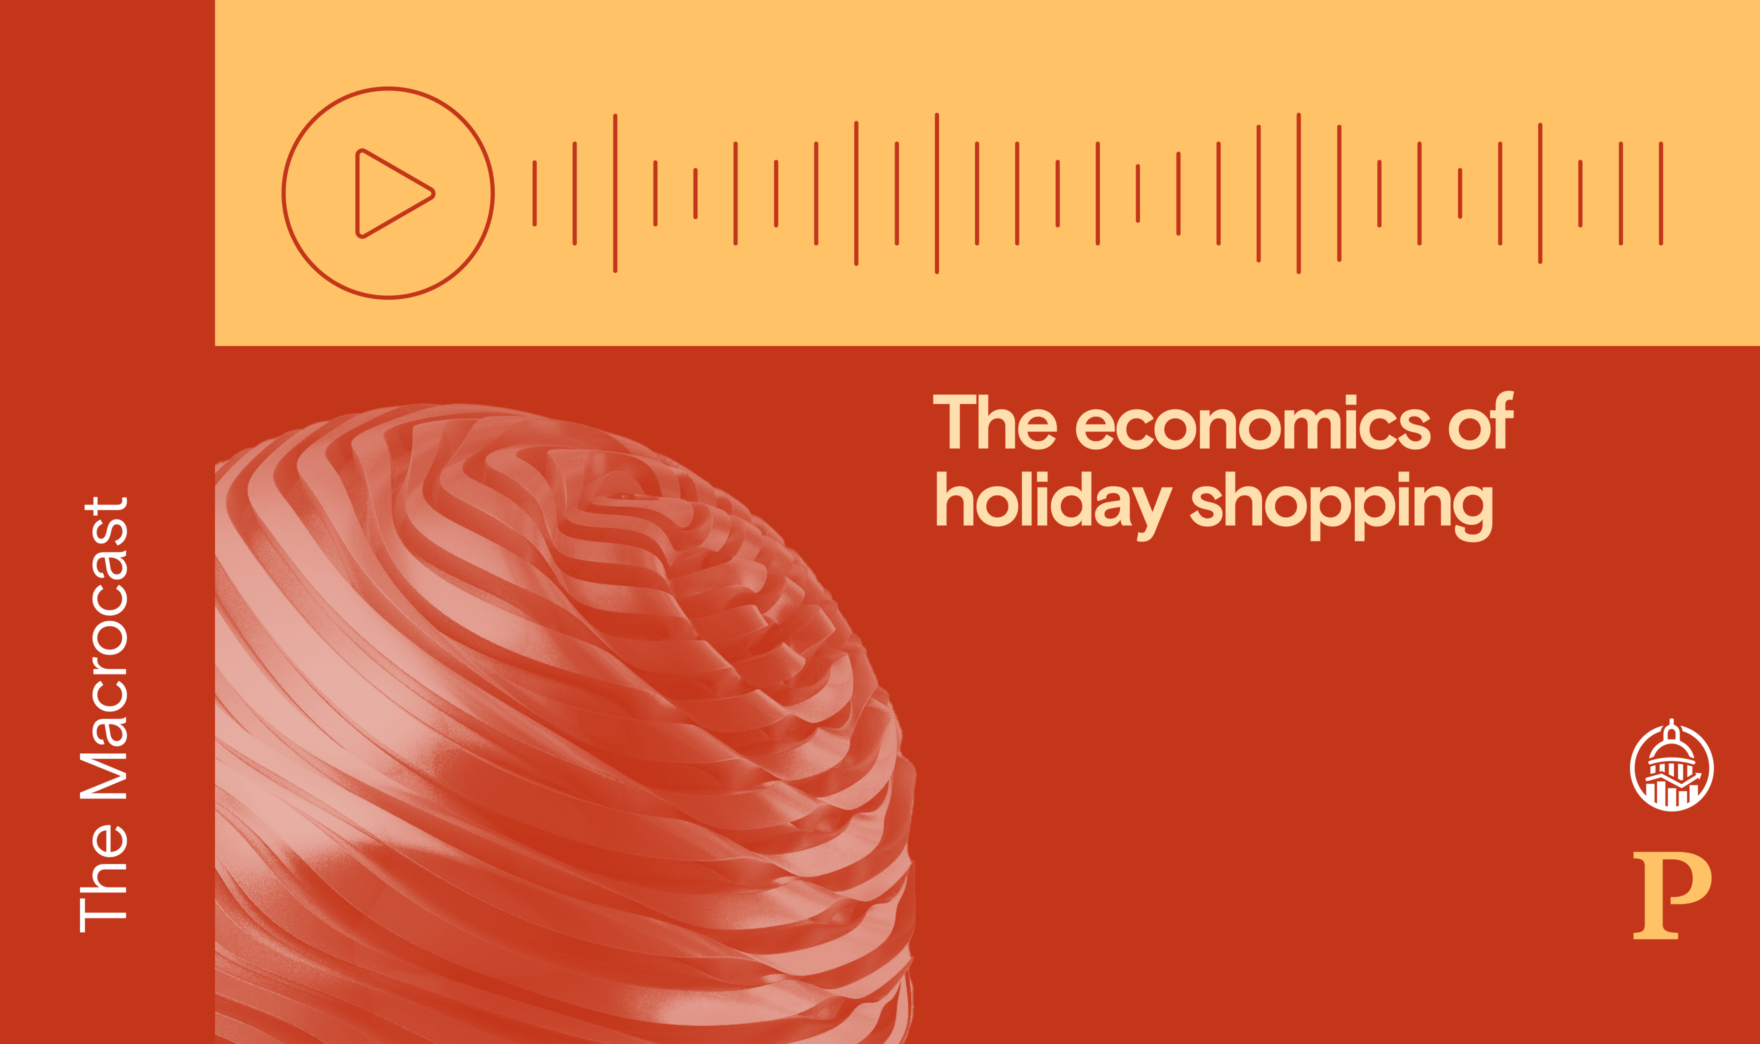 Macrocast: The economics of holiday shopping